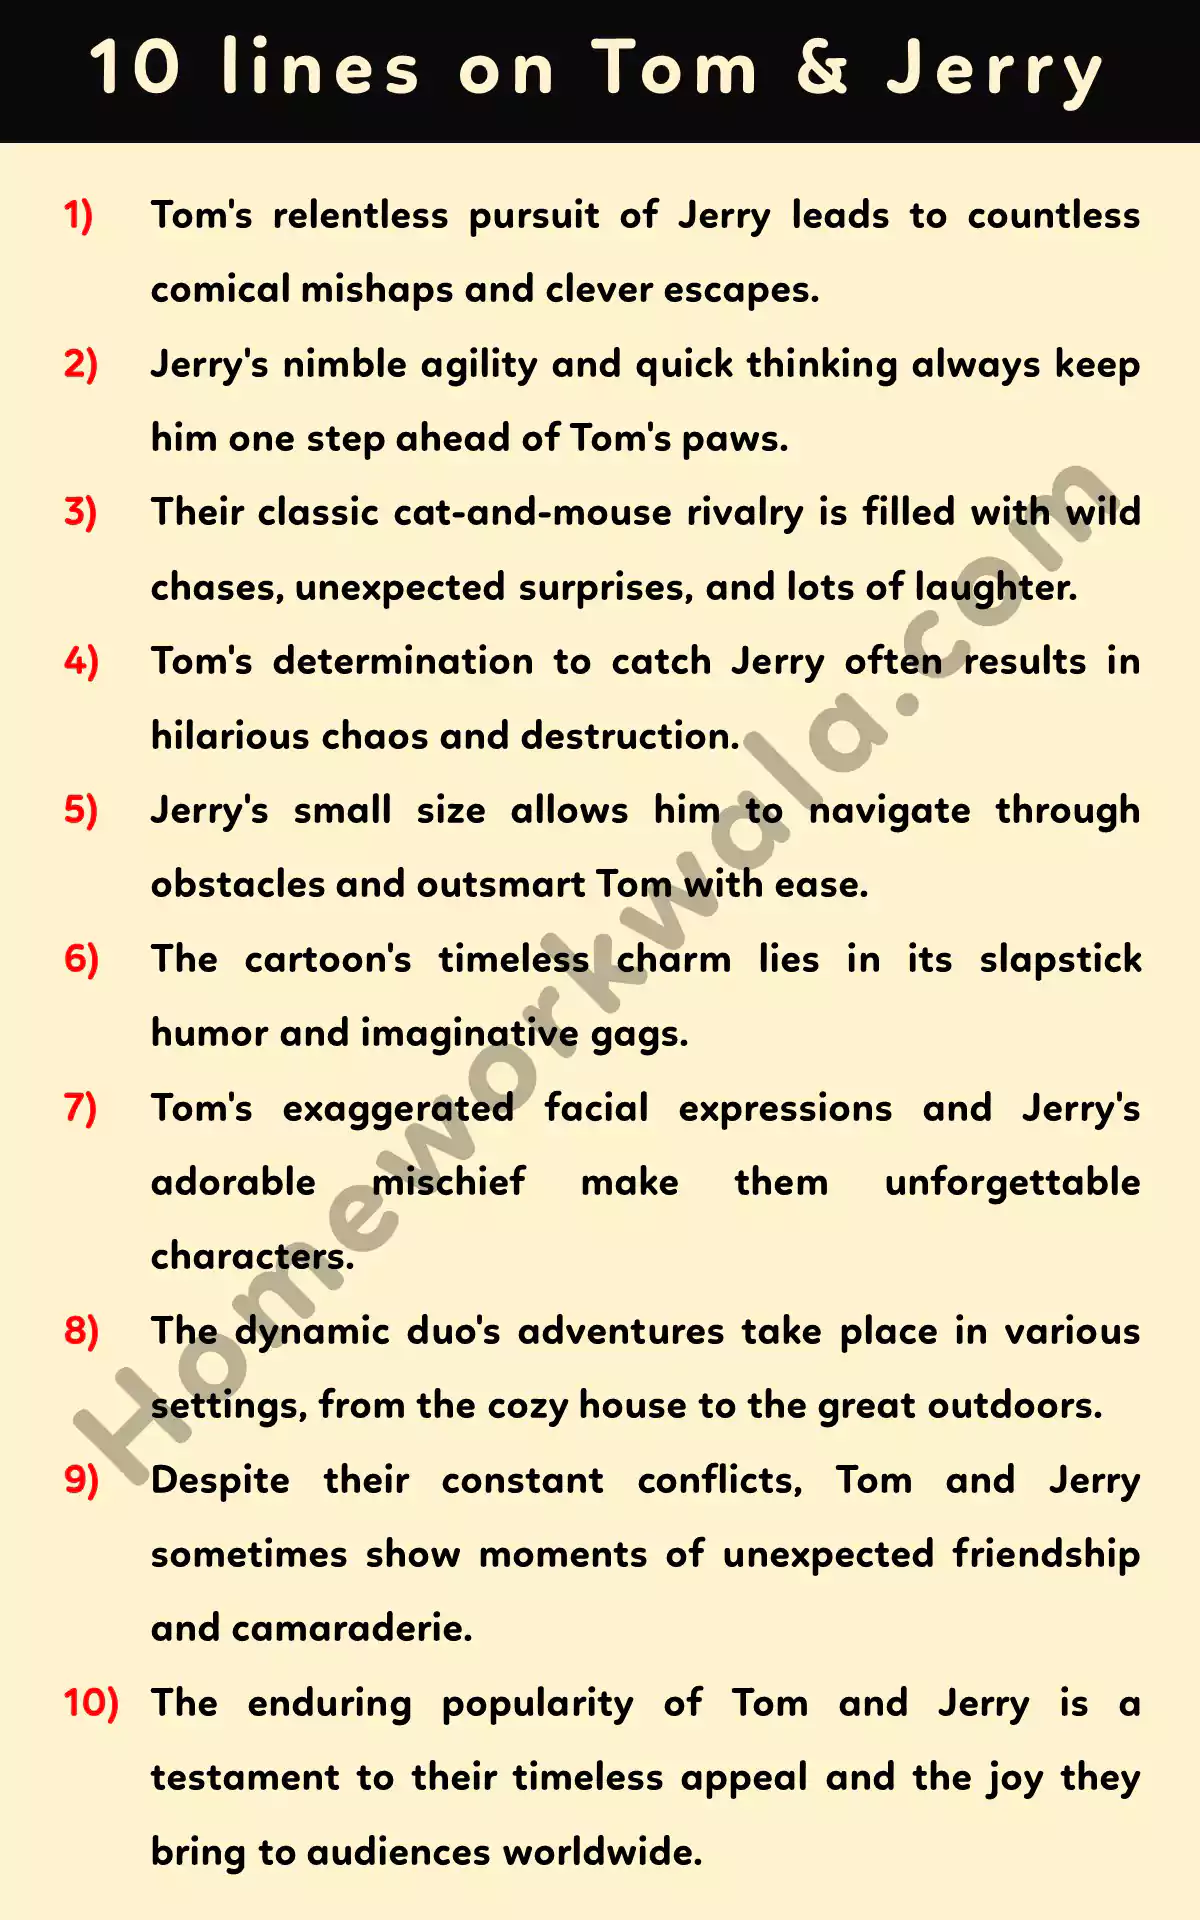 10 lines about my favourite cartoon character Tom and Jerry